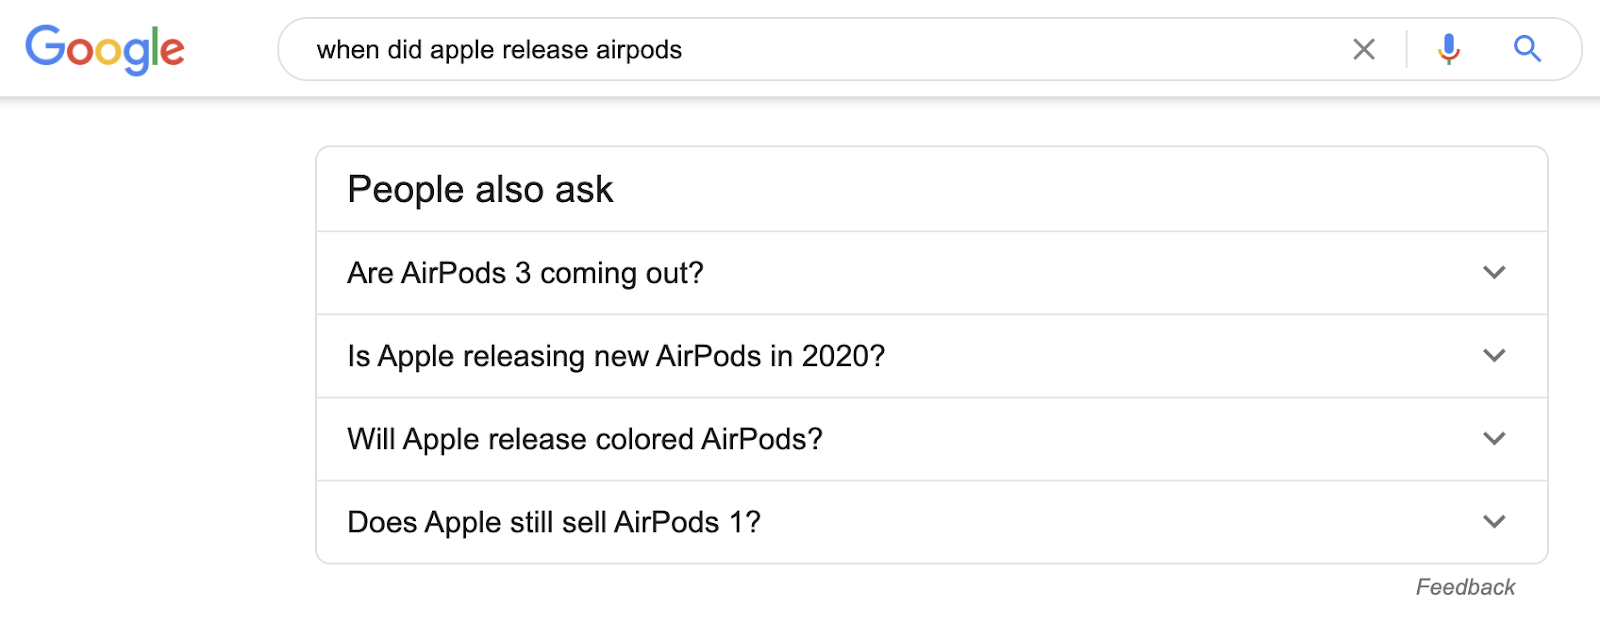 25 when did apple release airpods paa